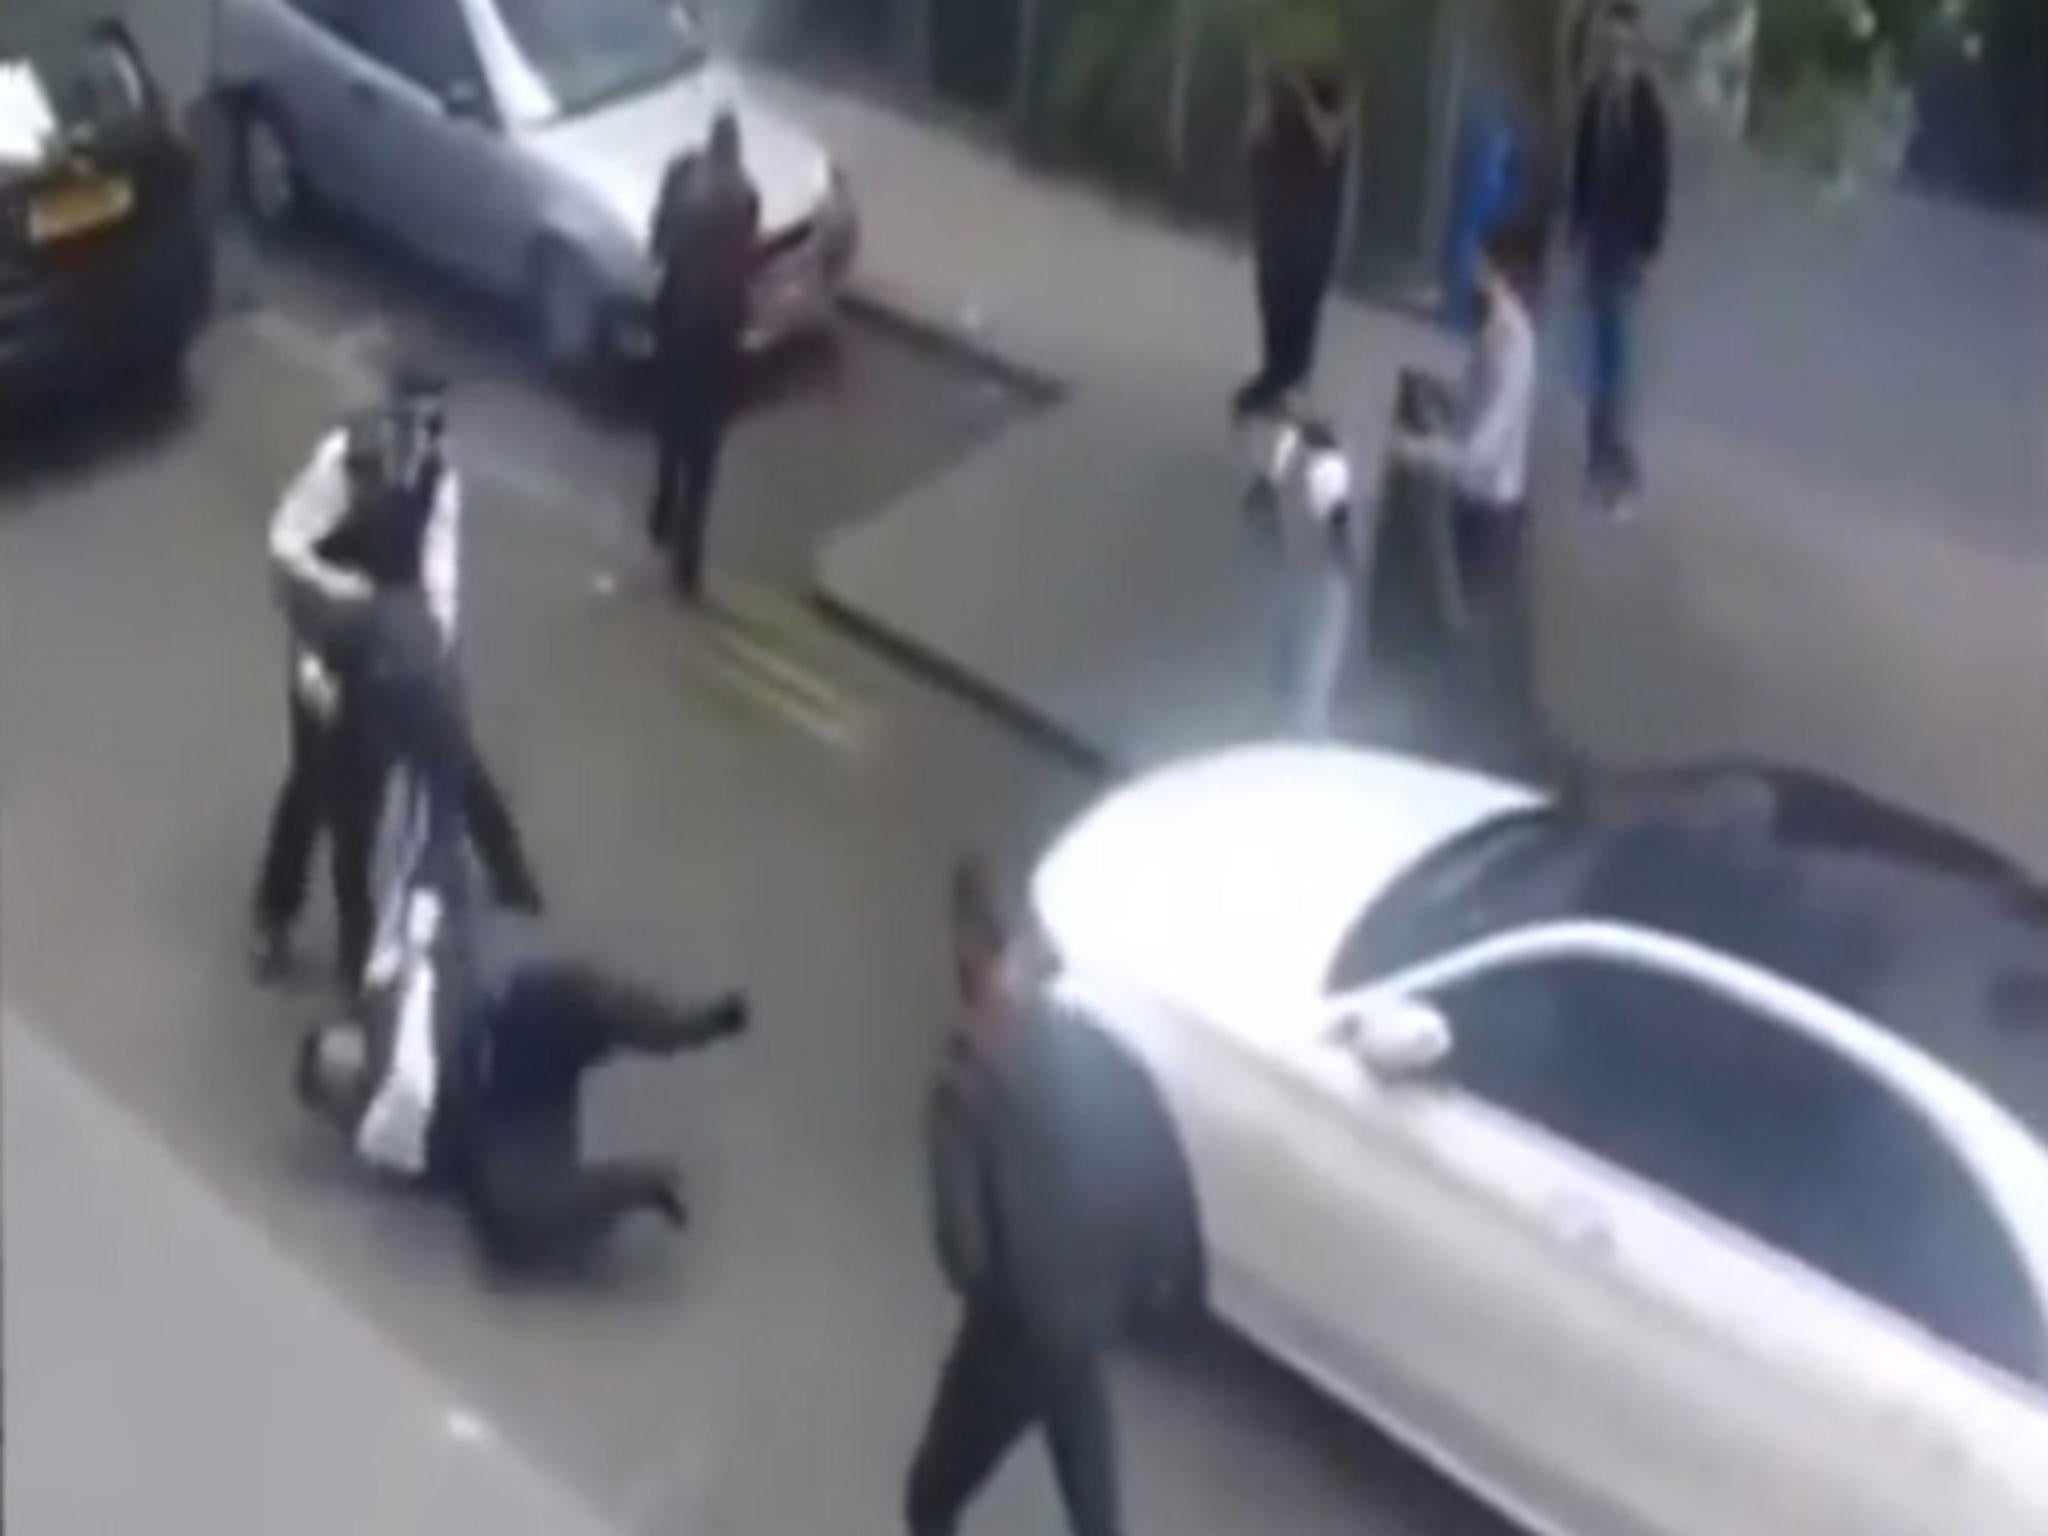 Police were attacked by a gang in Shadwell, East London this weekend